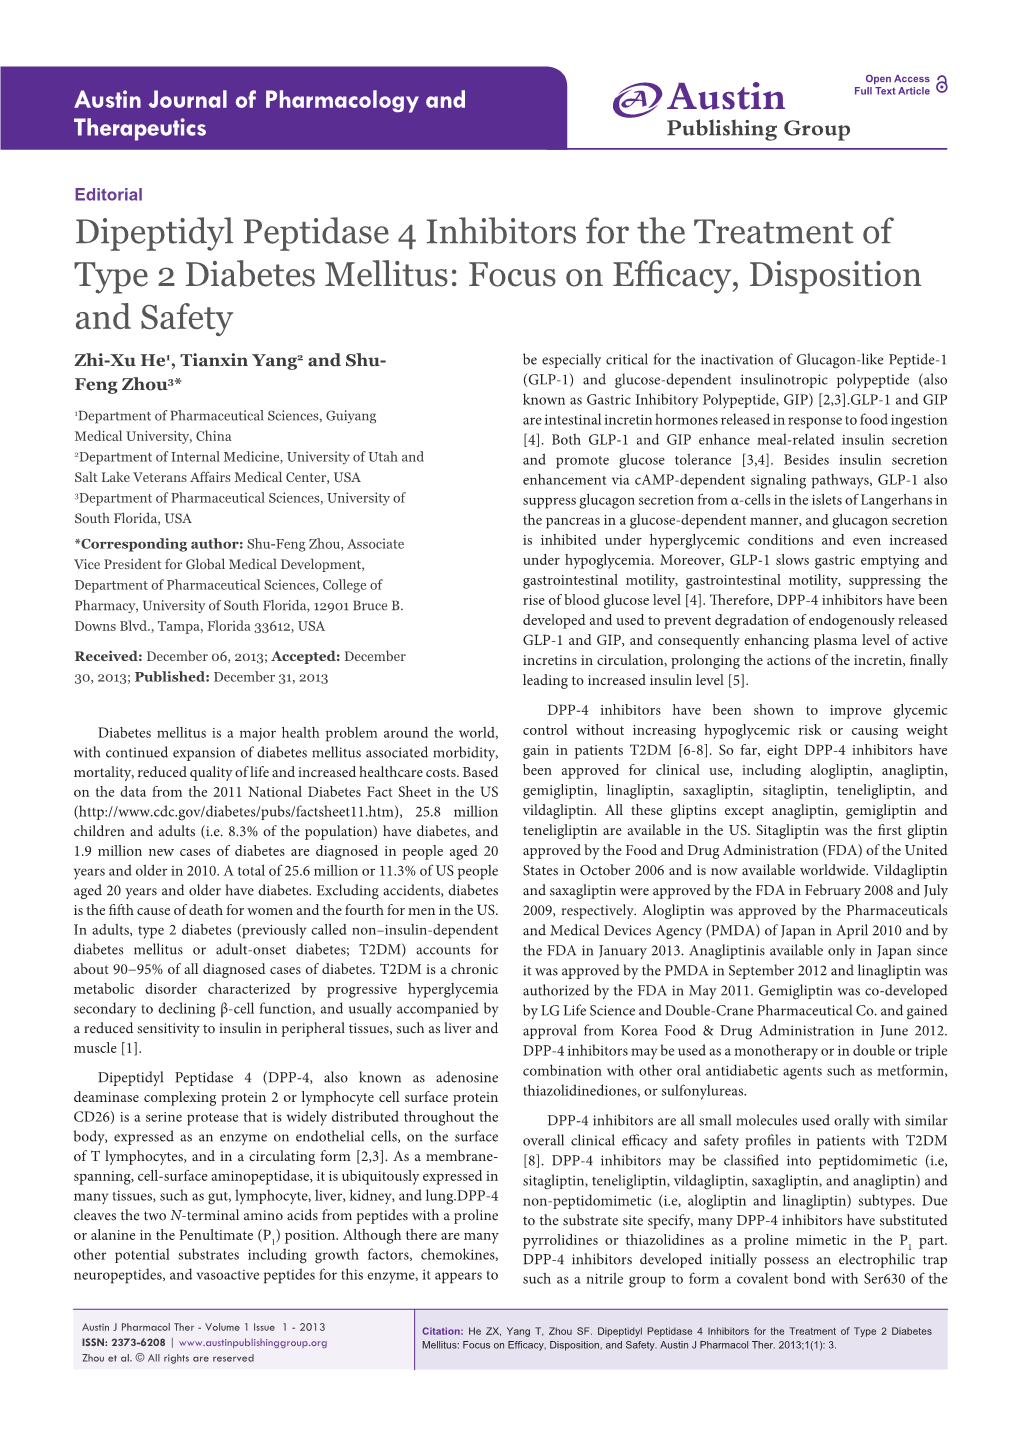 Dipeptidyl Peptidase 4 Inhibitors for The